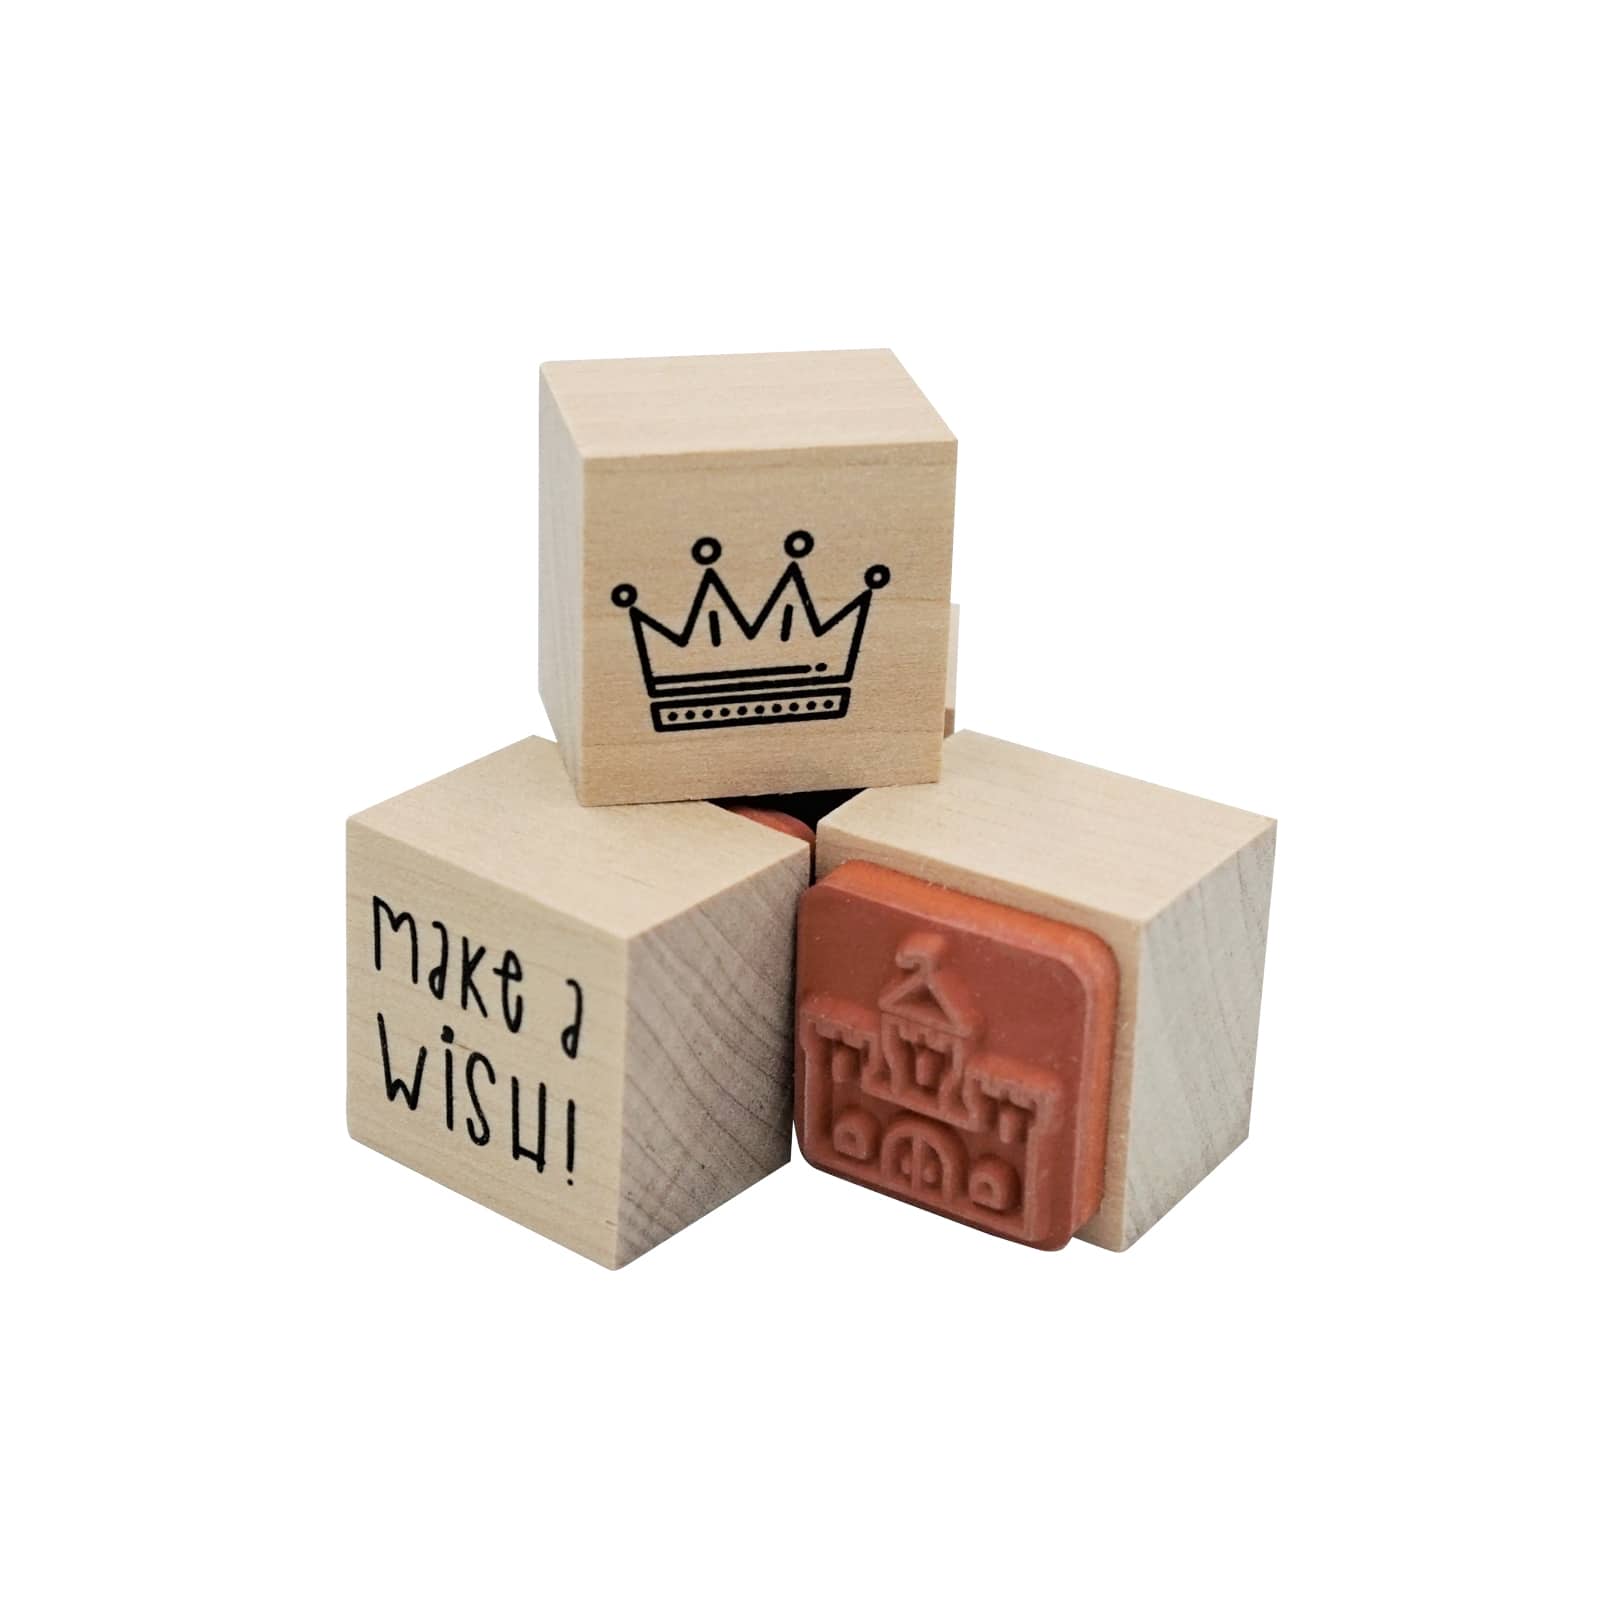 Princess Jar of Wood Stamps by Recollections&#x2122;